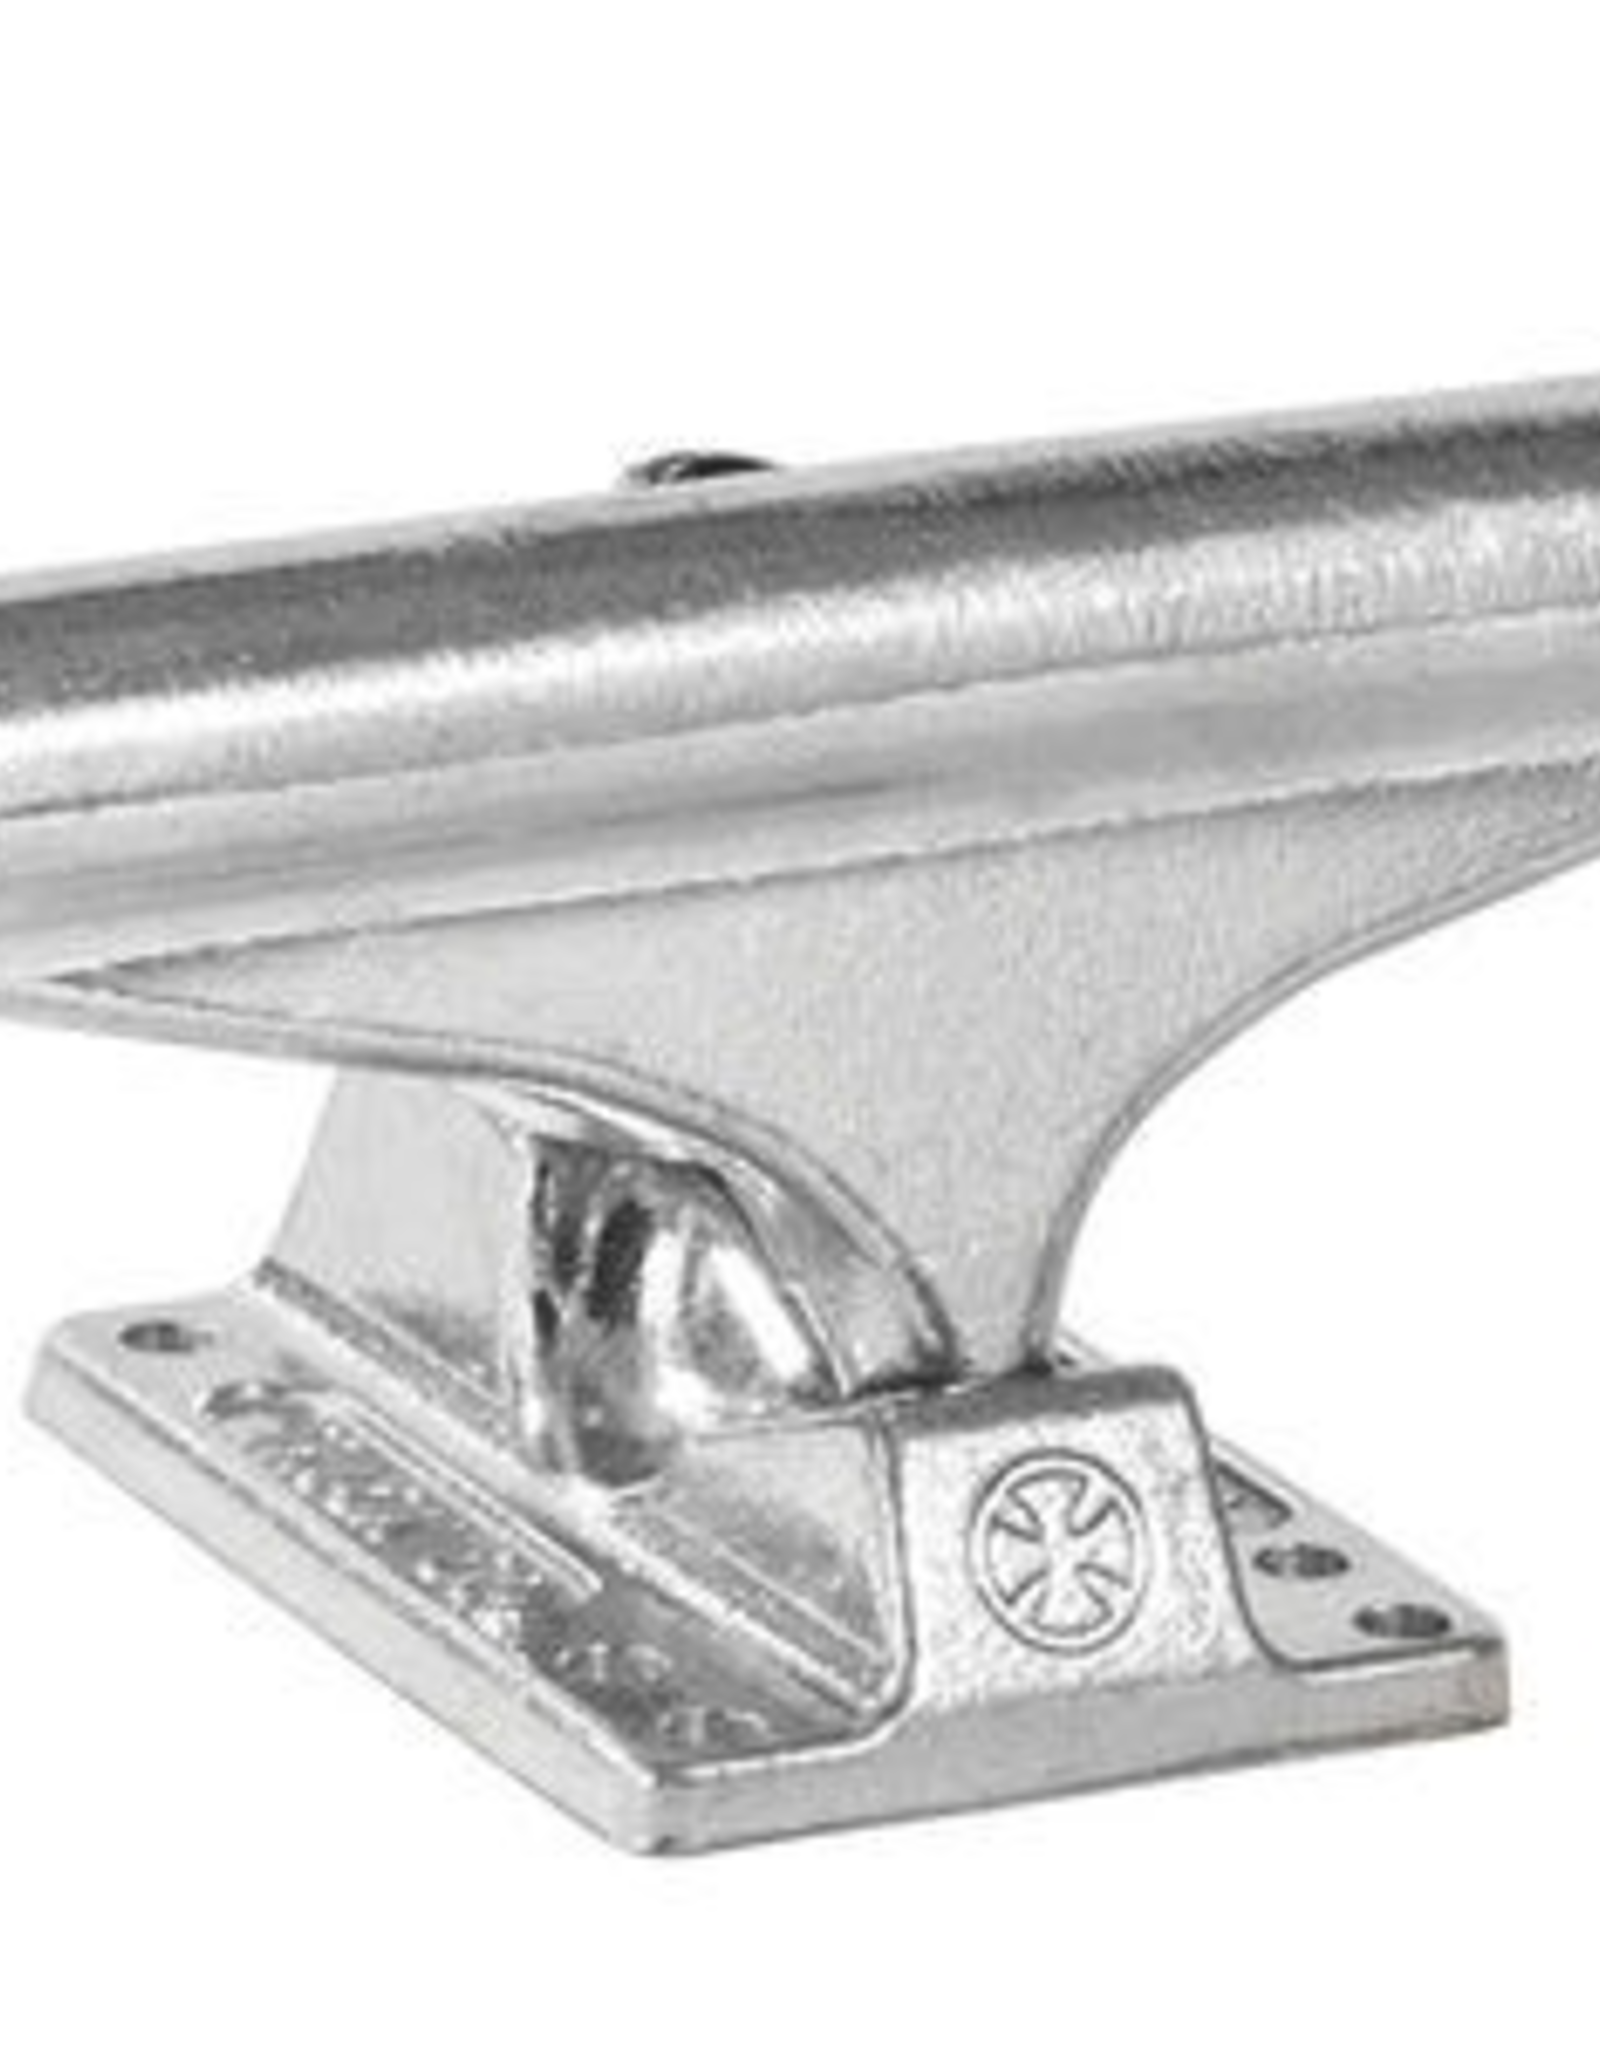 INDEPENDENT INDEPENDENT TRUCK, 169mm, POLISHED, STANDARD (PAIR)